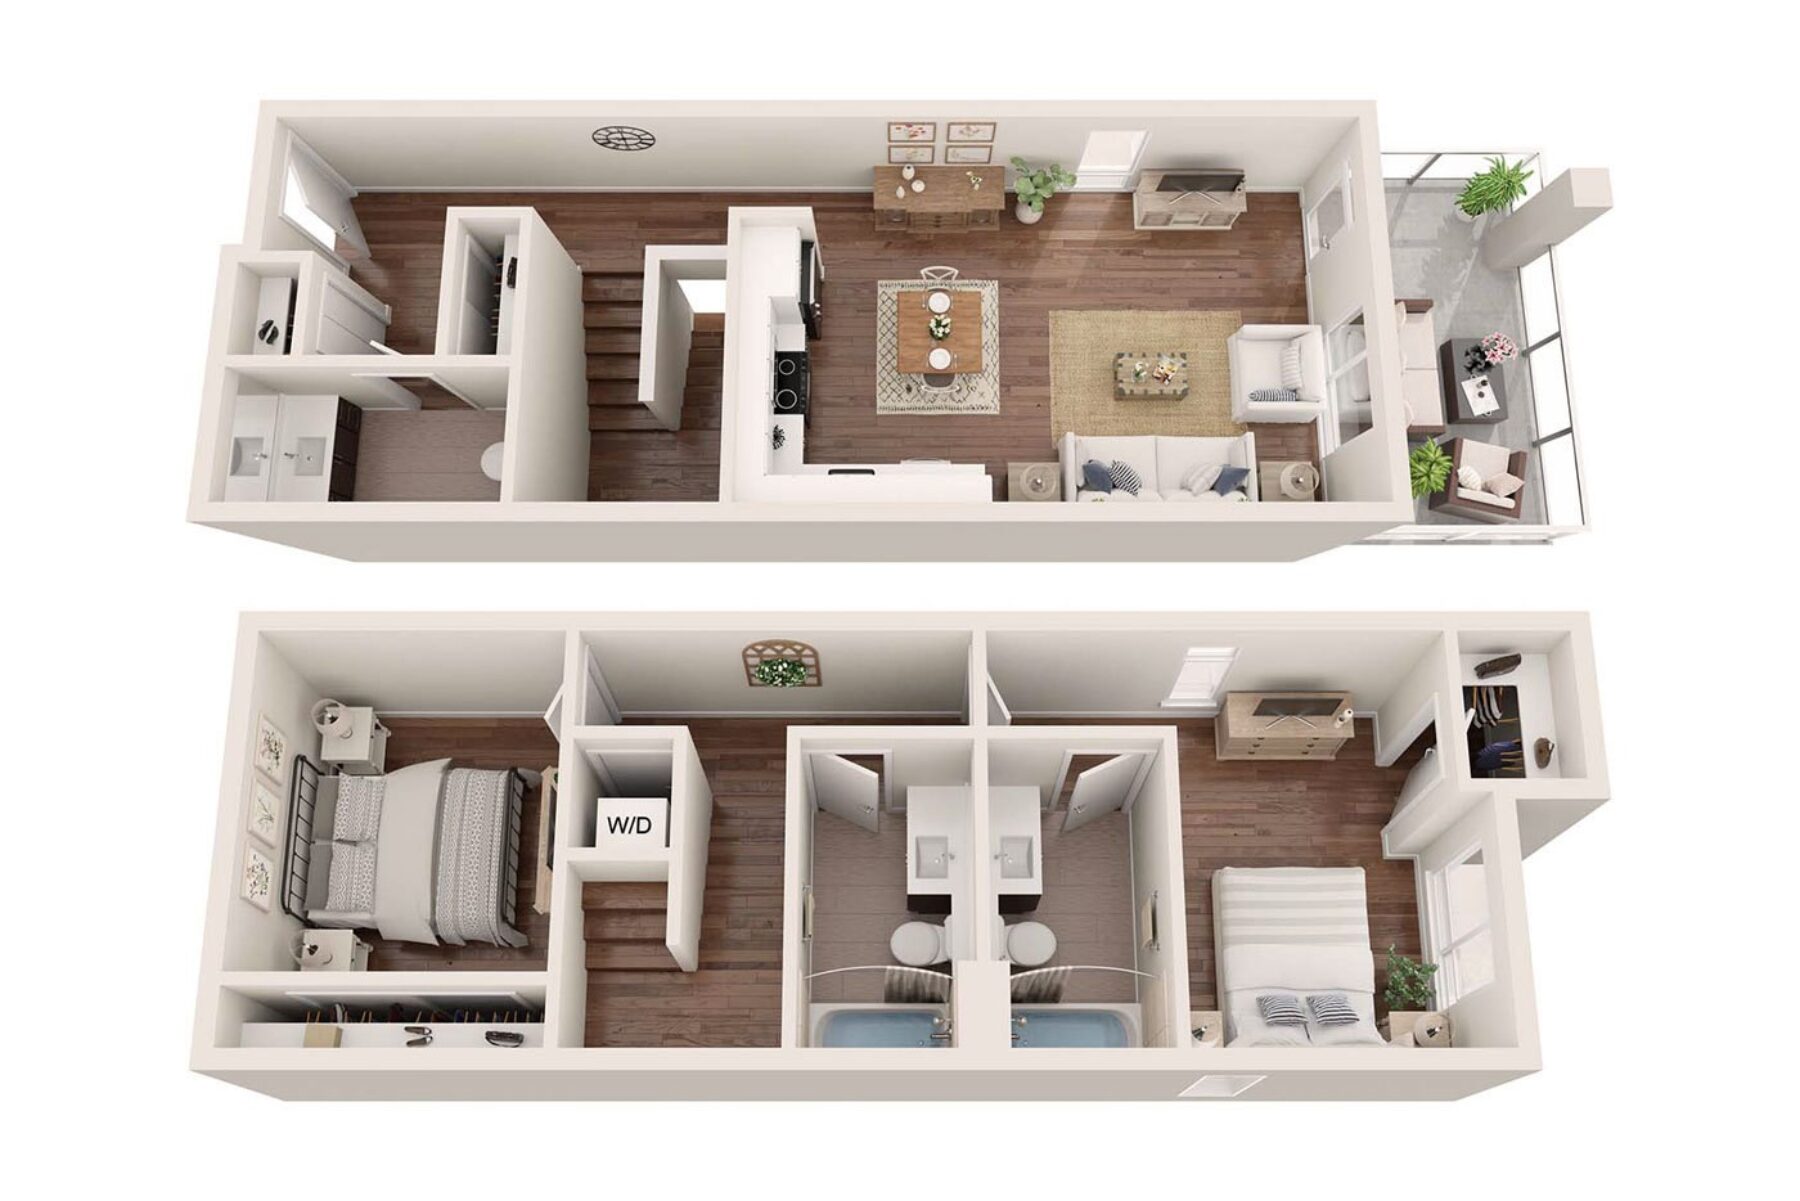 Plan Image: TH.2 - Two Bedroom Townhome w/ Balcony